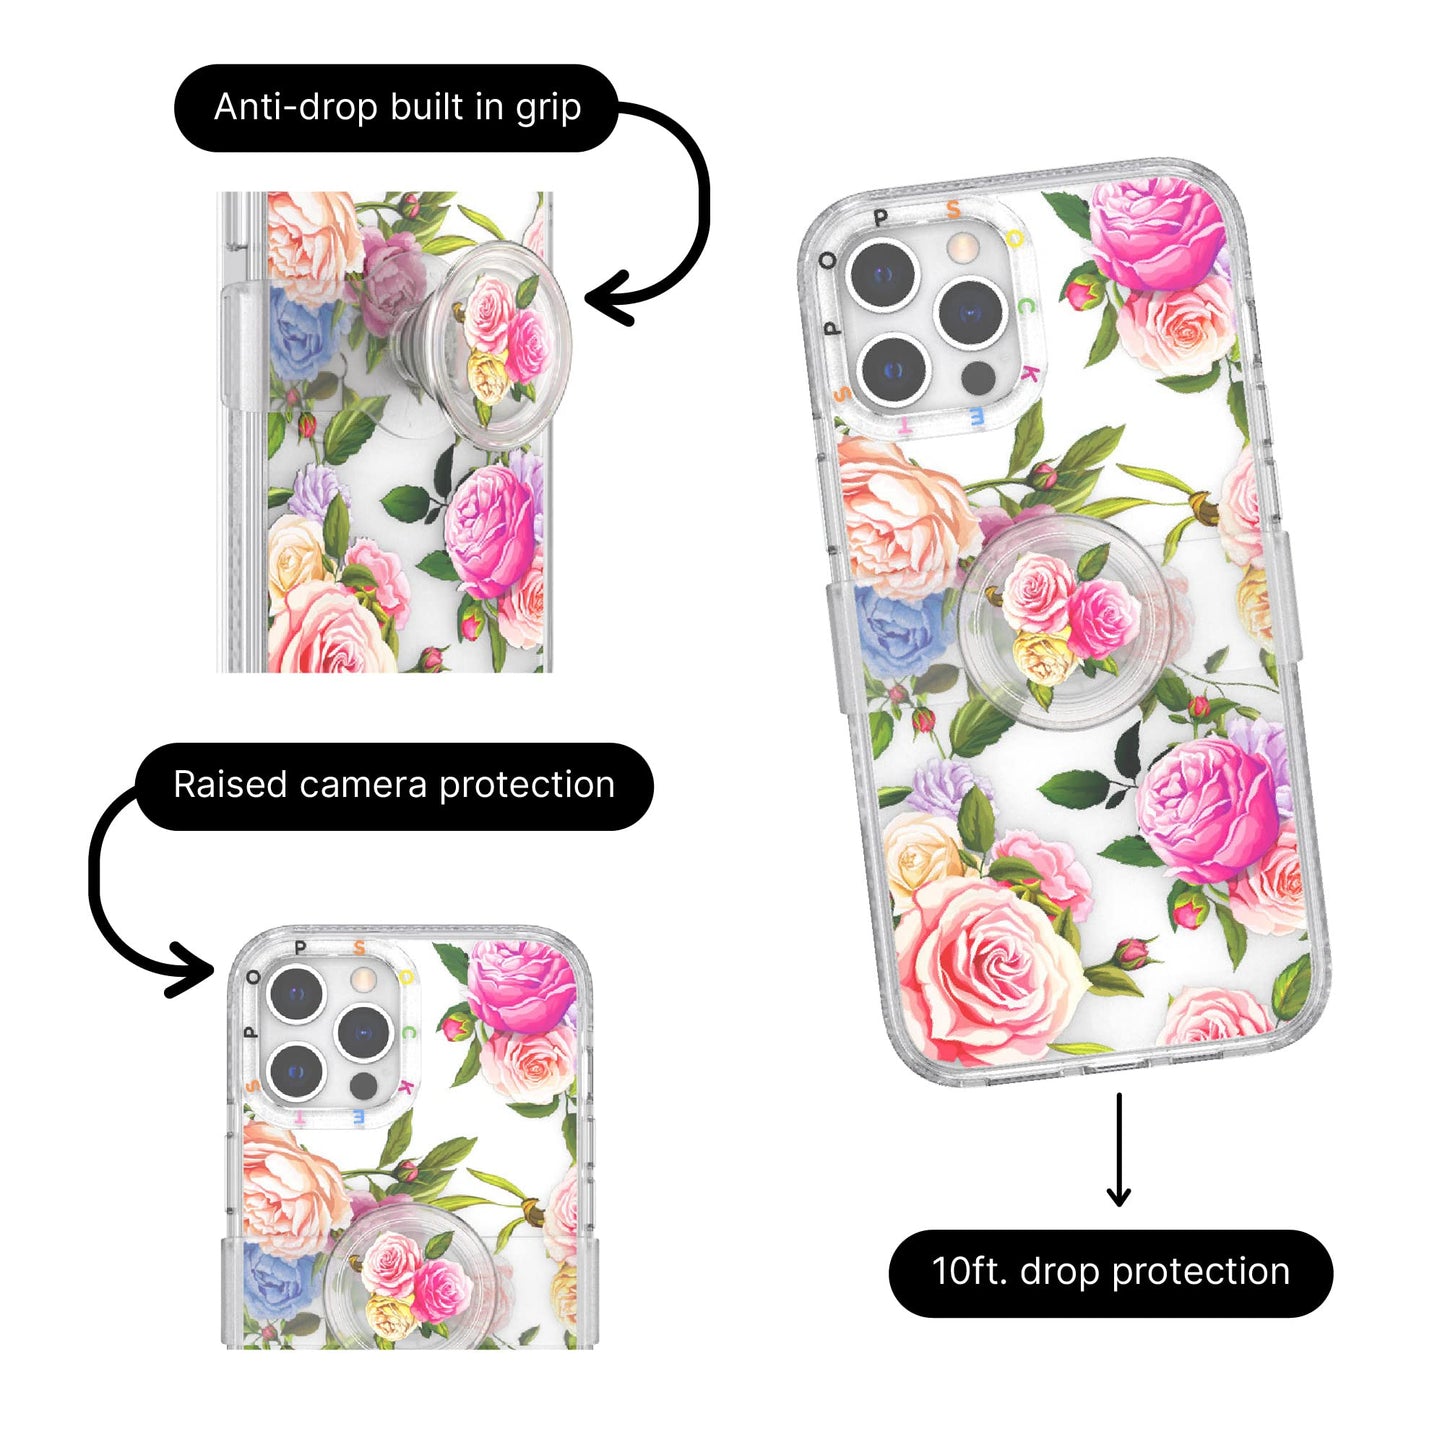 PopSockets: iPhone 12 Pro Max Case with Phone Grip and Slide, Phone Case for iPhone 12 Pro Max - Vintage Floral